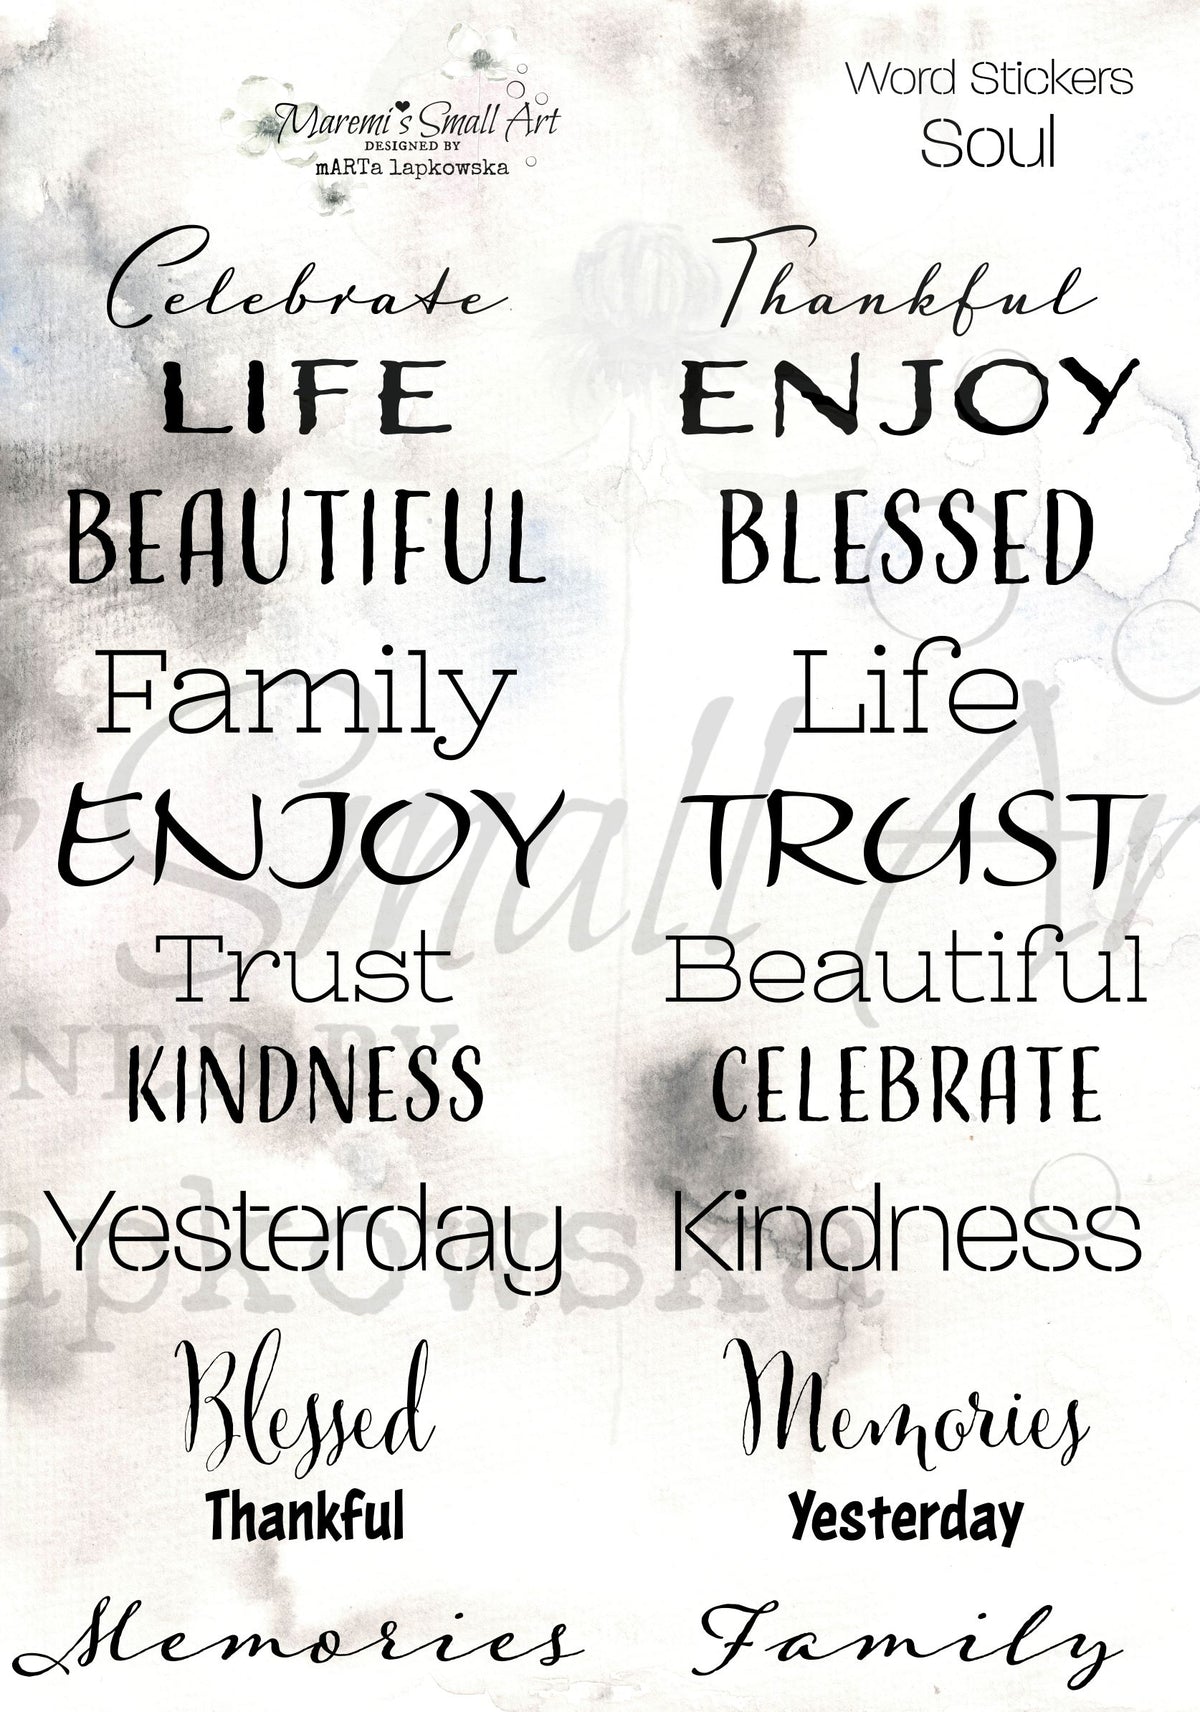 A5 New Transparent Stickers - Set of 9 Maremi's Words, Sayings – Maremi  Small Art